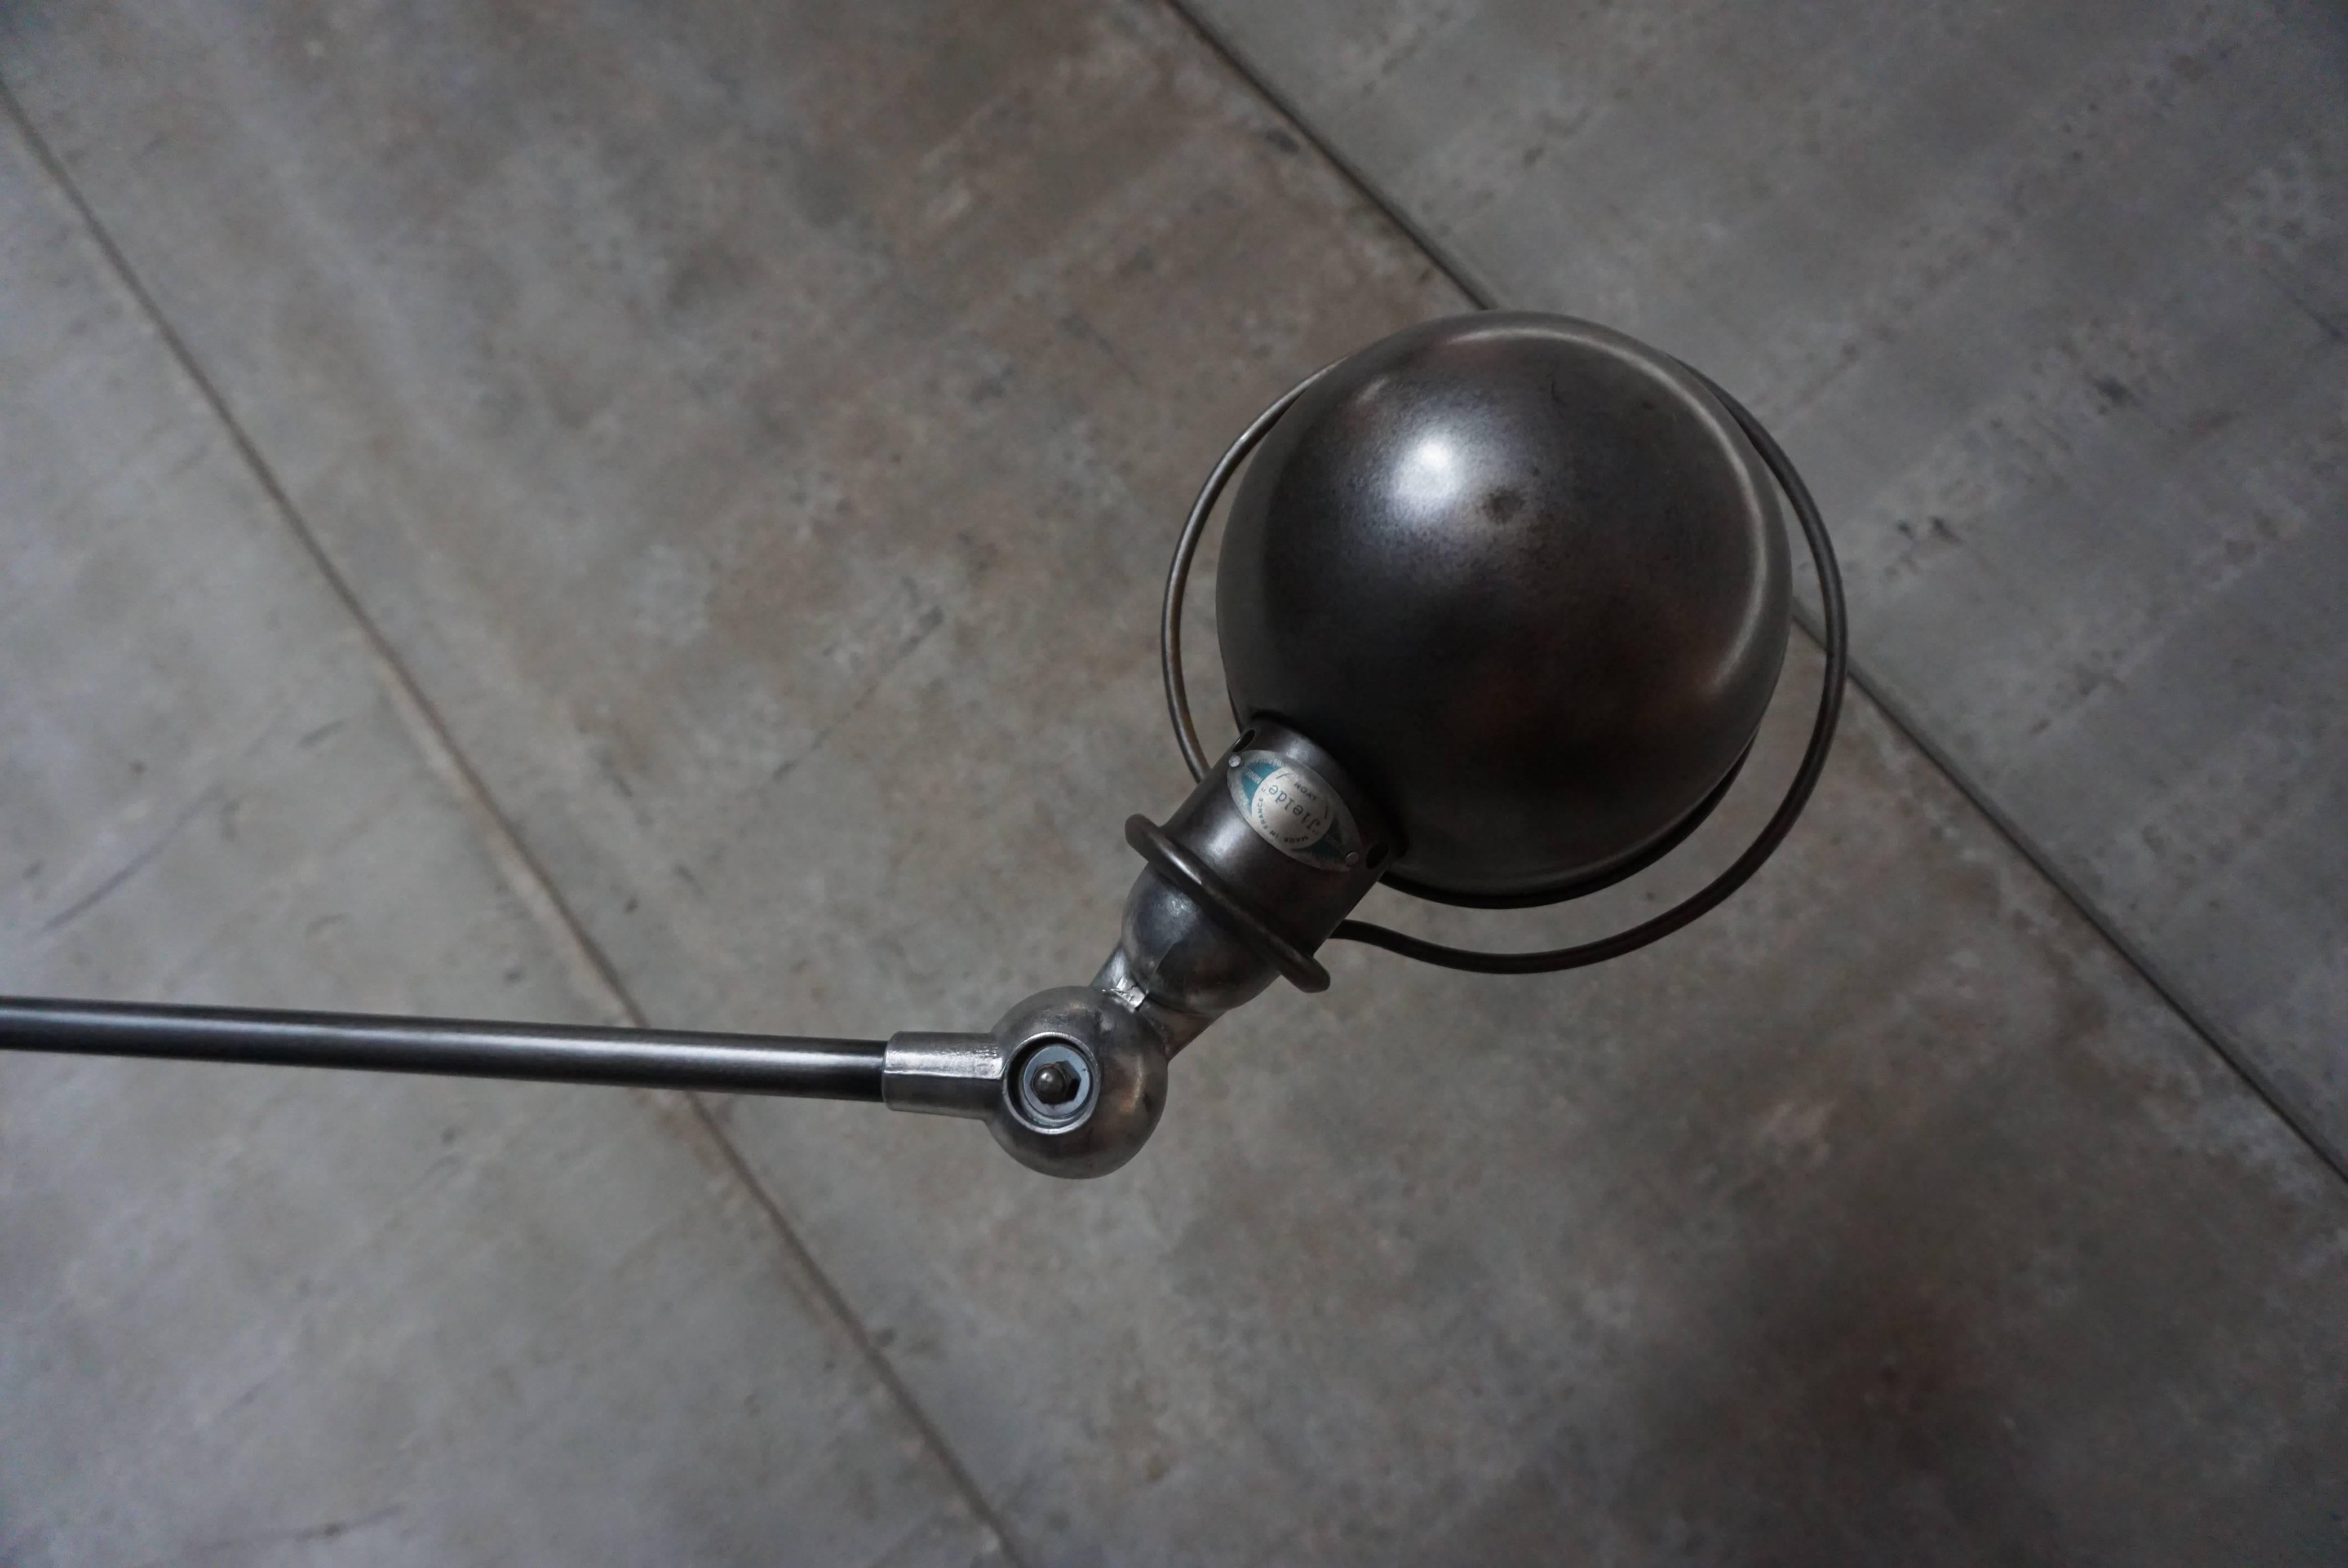 This four-armed Industrial lamp was manufactured by Jieldé in Lyon, France during the 1950s. The lamp is mounted on a clean brake disk. Each arm of the light measures 40cm. The metal is brushed and treated with graphite wax. It has been fully